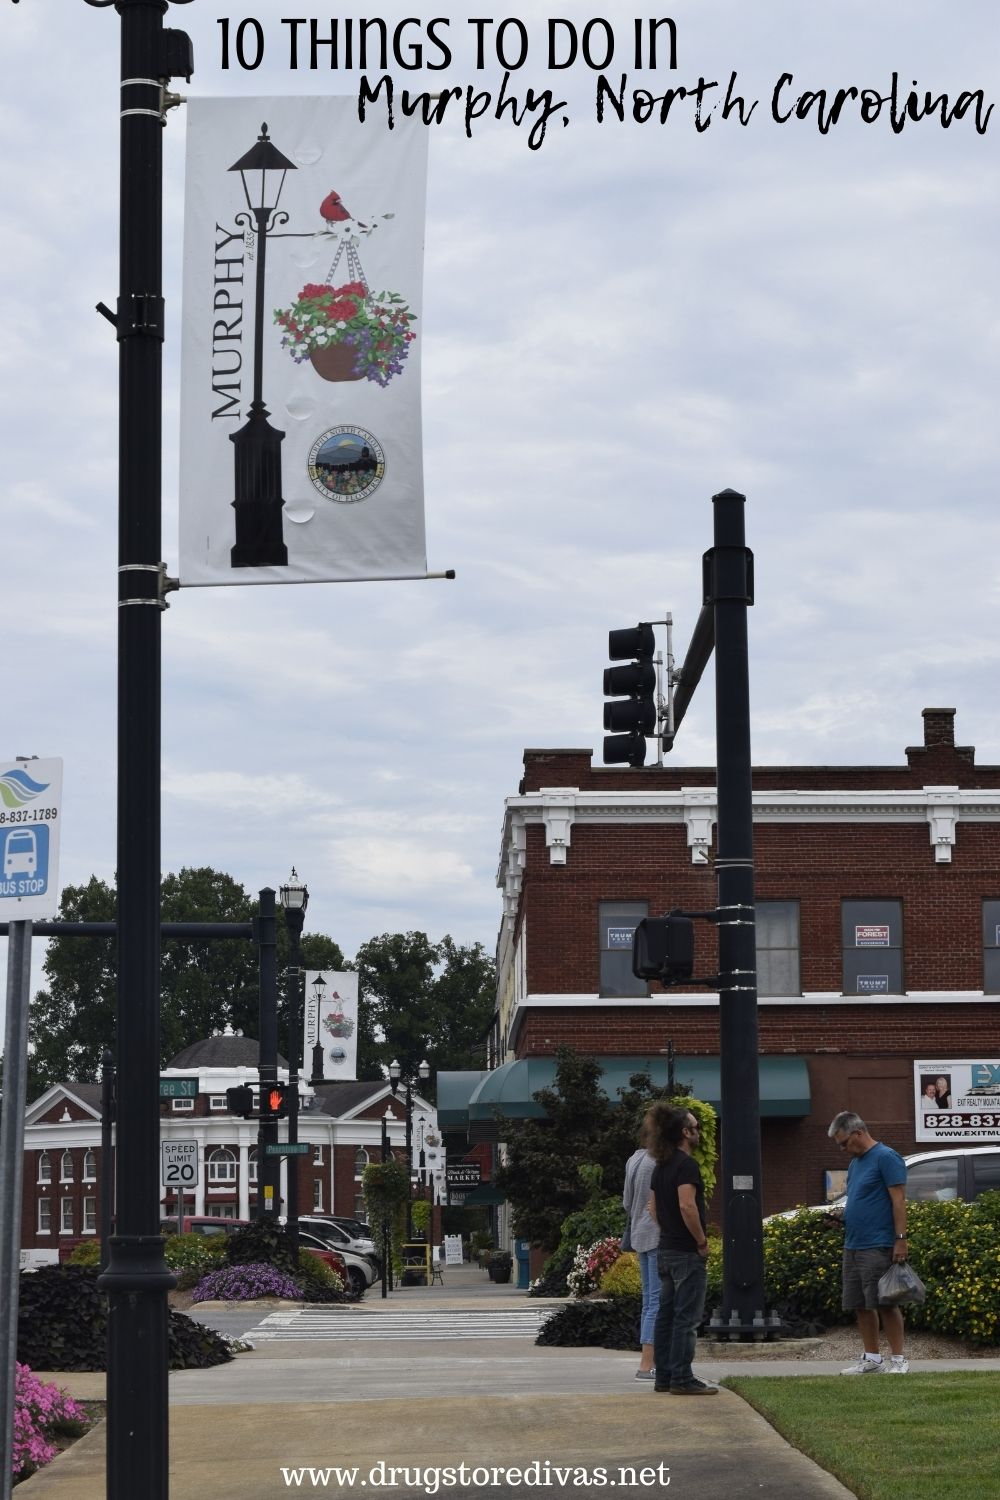 A sign post in Murphy, NC with the words "10 Things To Do In Murphy, North Carolina" written next to it digitally.